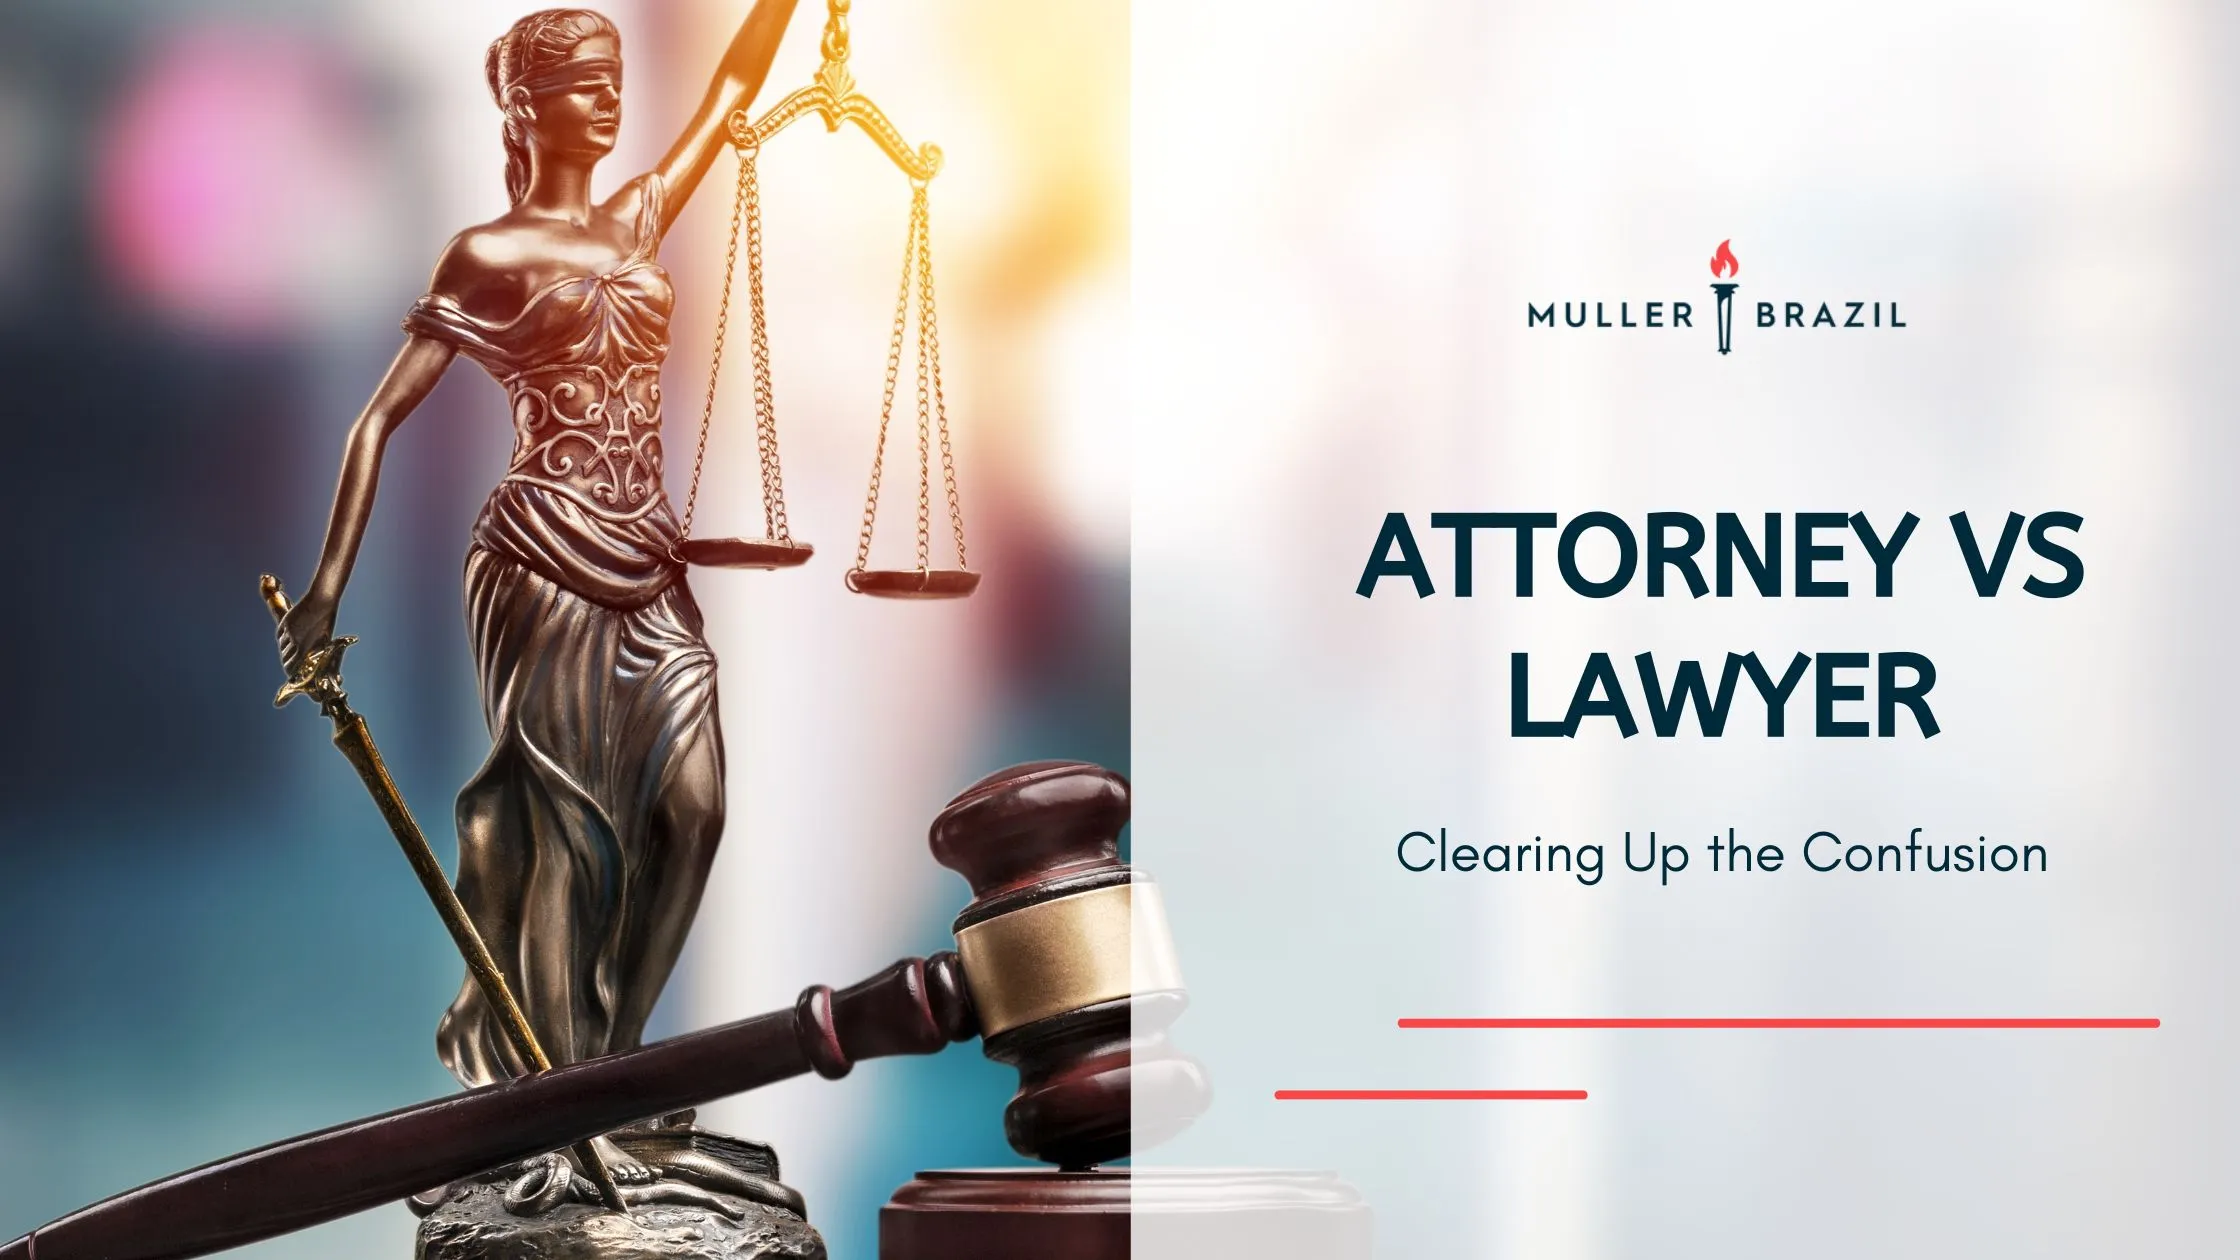 An image showcasing the scales of justice, a gavel, and legal books, symbolizing the legal profession and the detailed explanation of 'Attorney vs Lawyer: Clearing Up the Confusion' provided in the blog post.